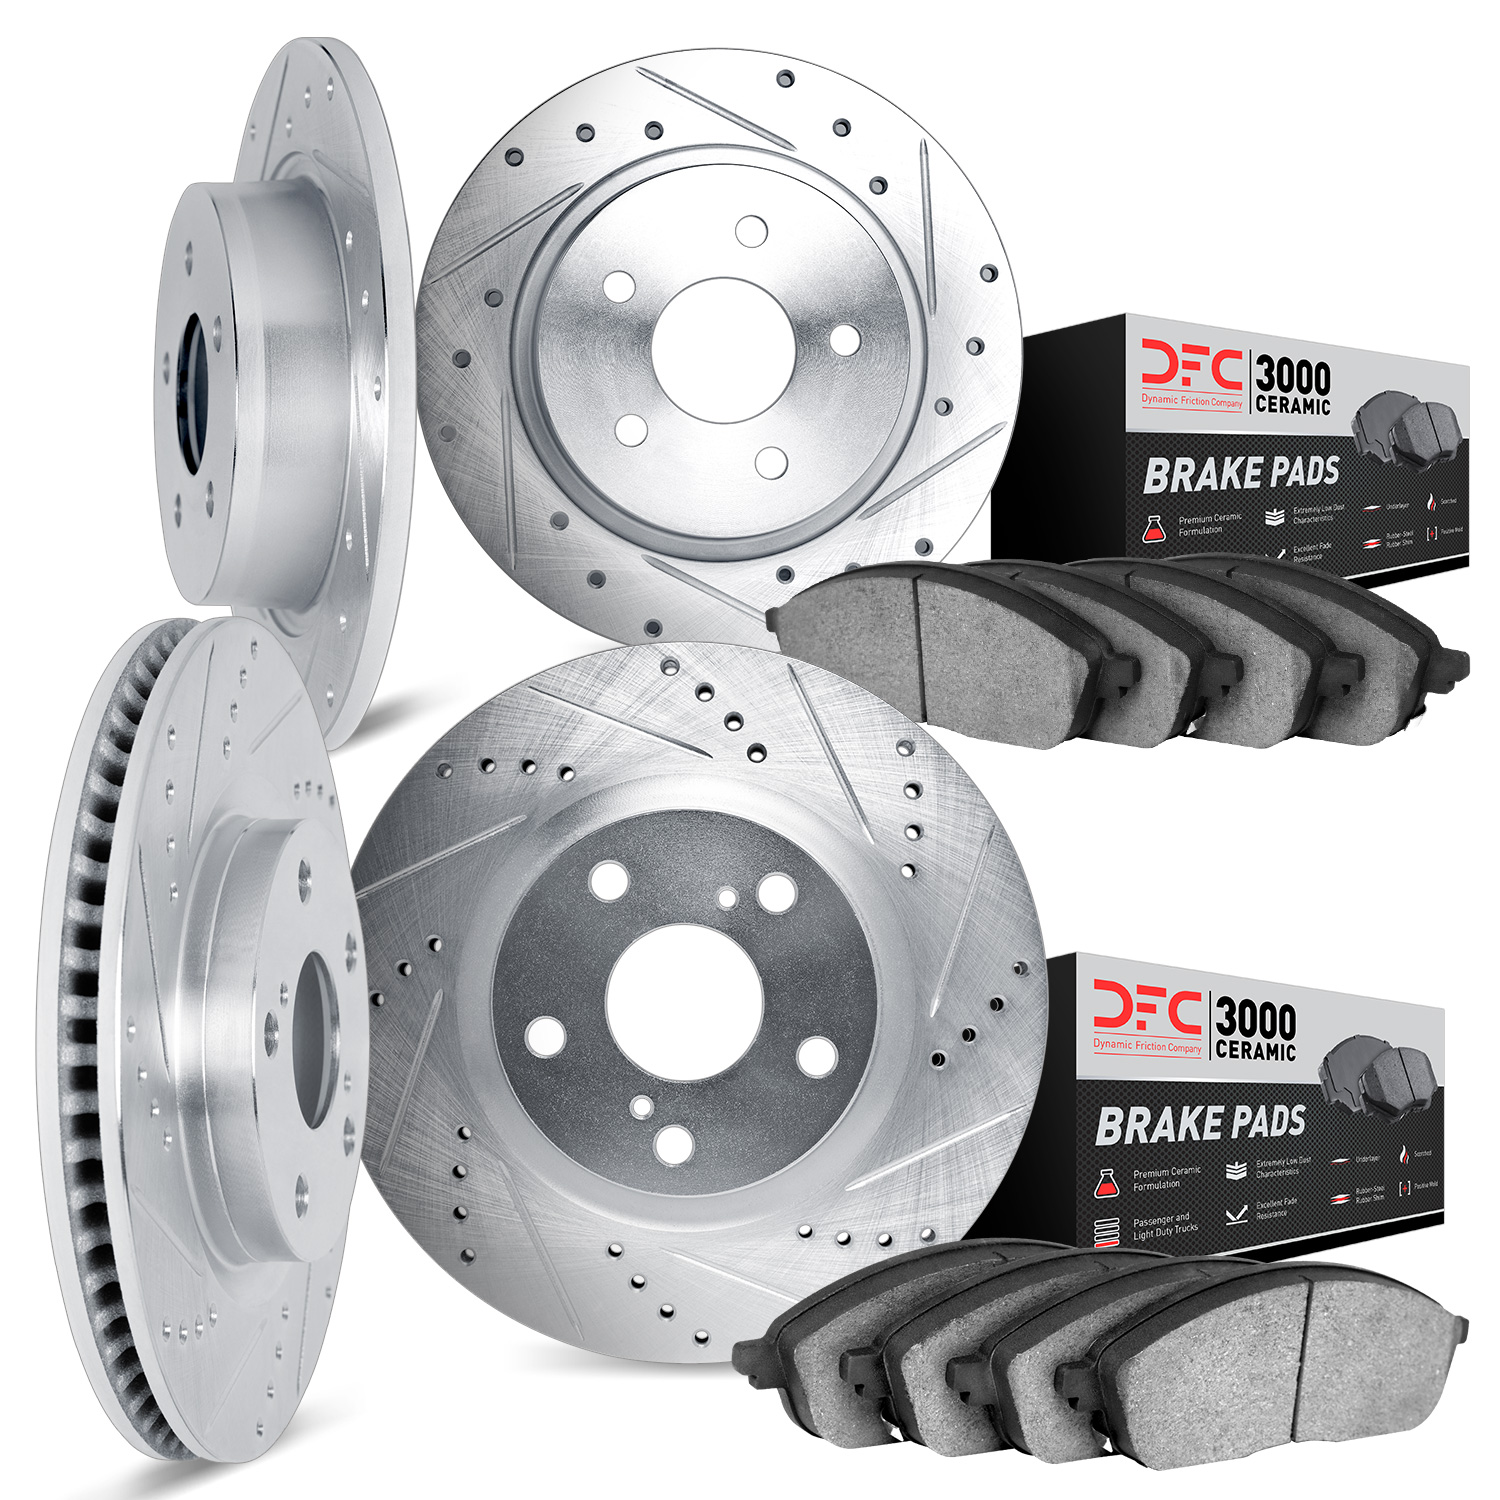 7304-80017 Drilled/Slotted Brake Rotor with 3000-Series Ceramic Brake Pads Kit [Silver], 2001-2003 Ford/Lincoln/Mercury/Mazda, P